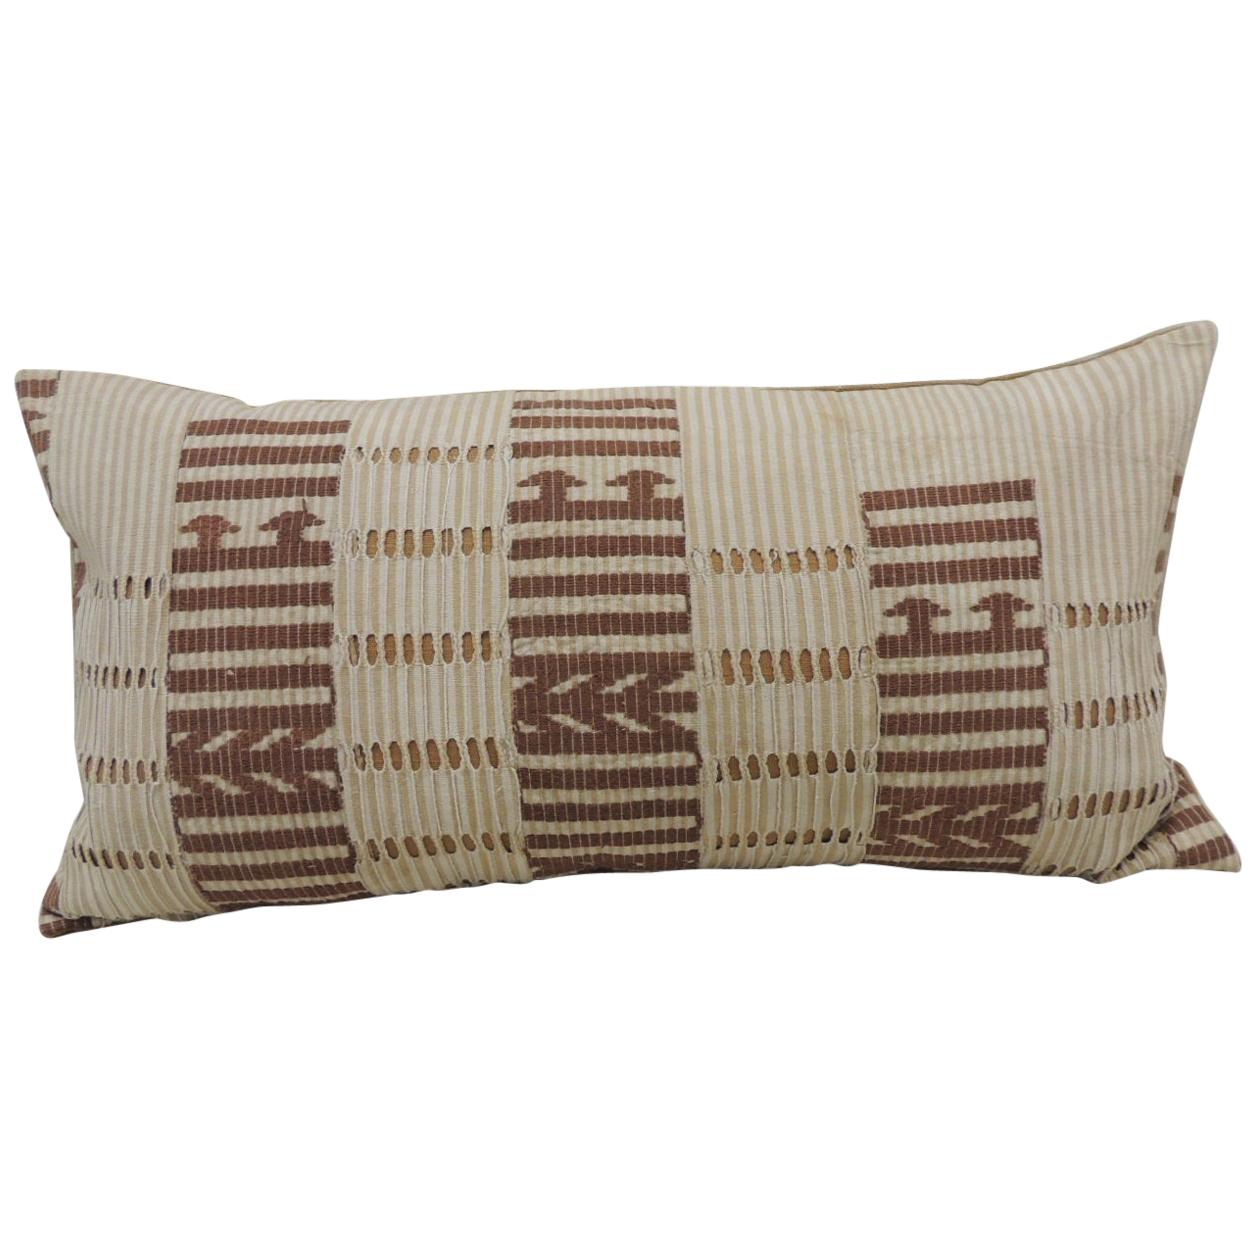 Vintage Tan and Brown Woven Ewe Stripweaves African Bolster Decorative Pillow